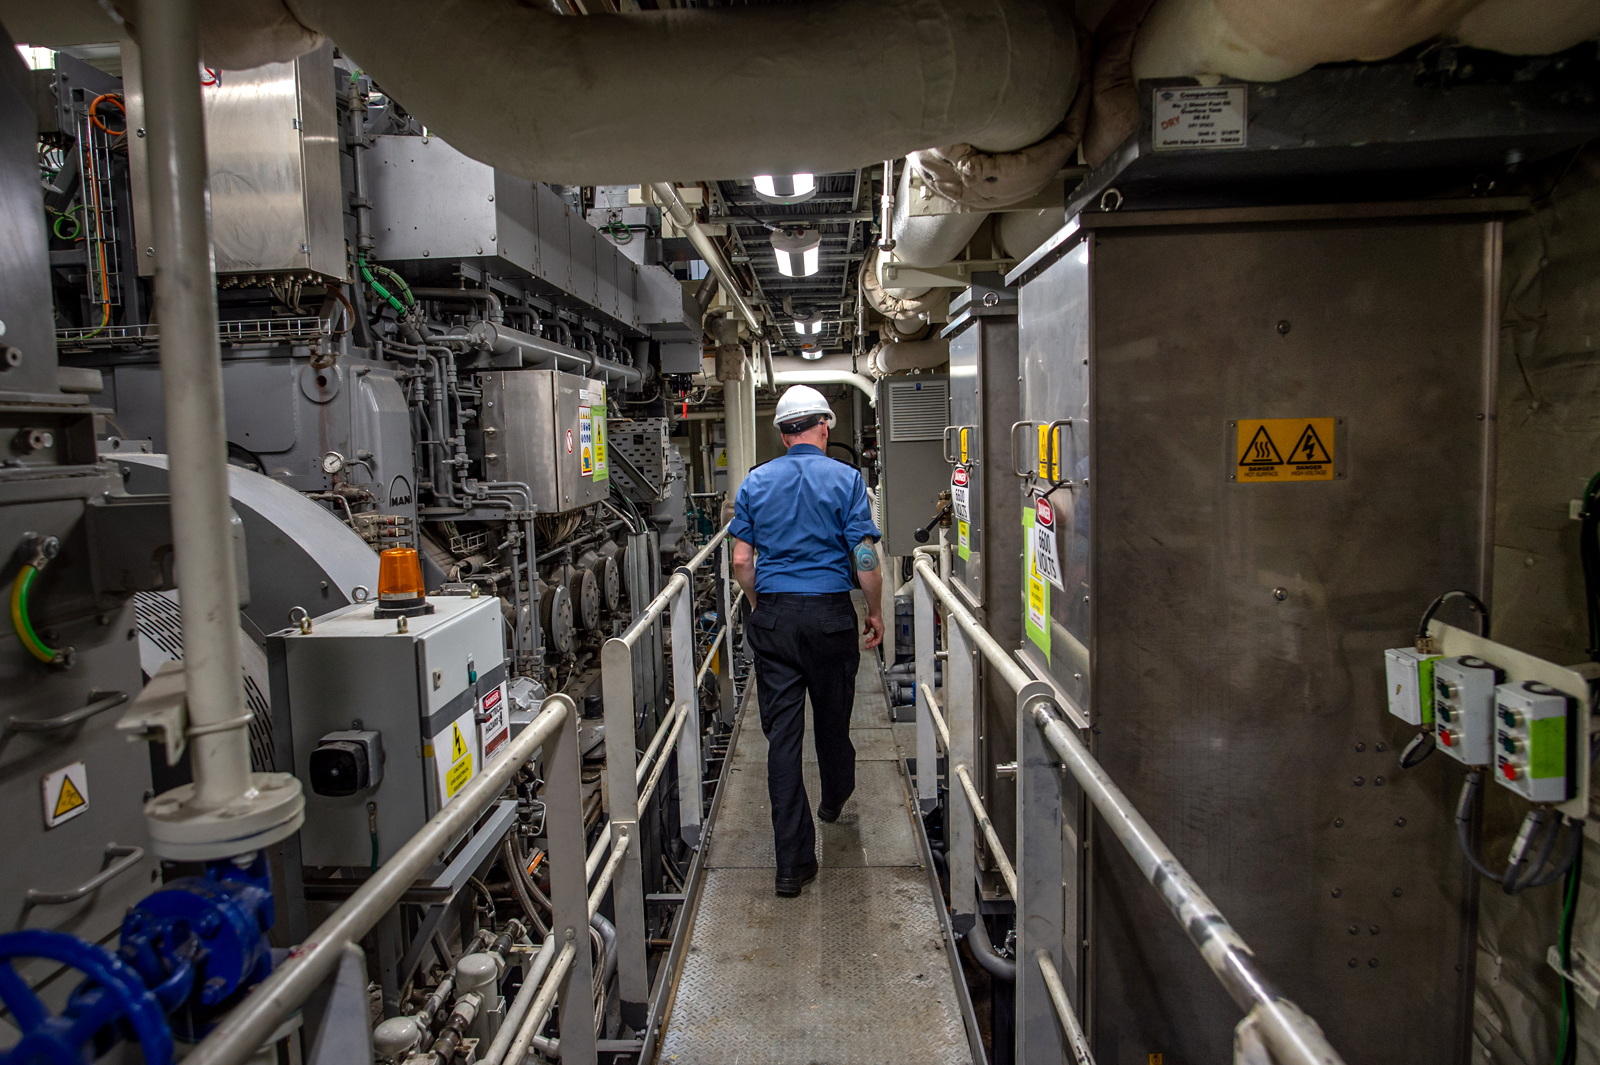 The virtual tour of HMCS Harry DeWolf included the machinery control and engine rooms. Photo by Cpl David Veldman, CAF Photo